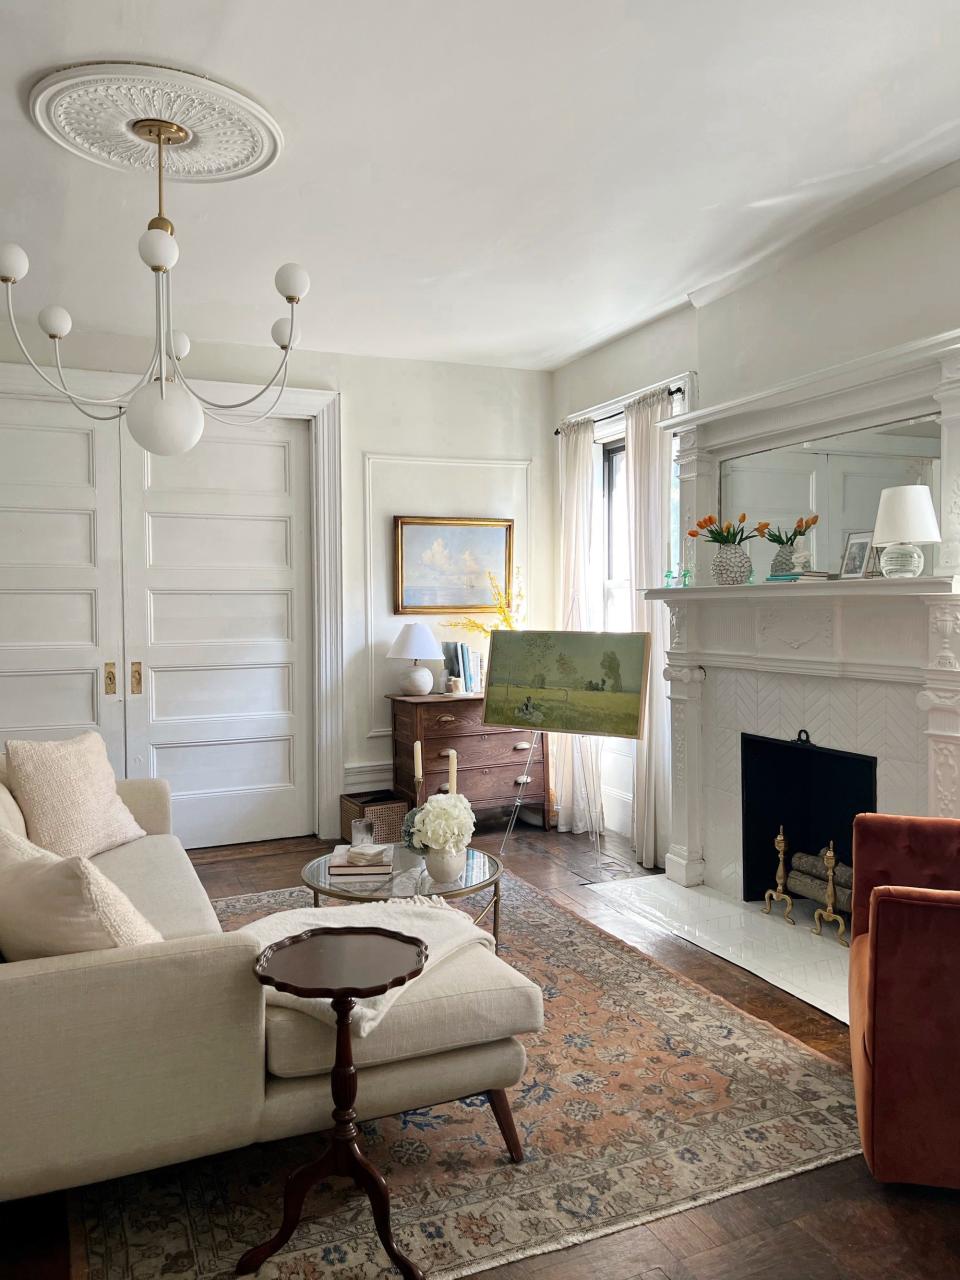 A living room with a white fireplace and white pocket doors.